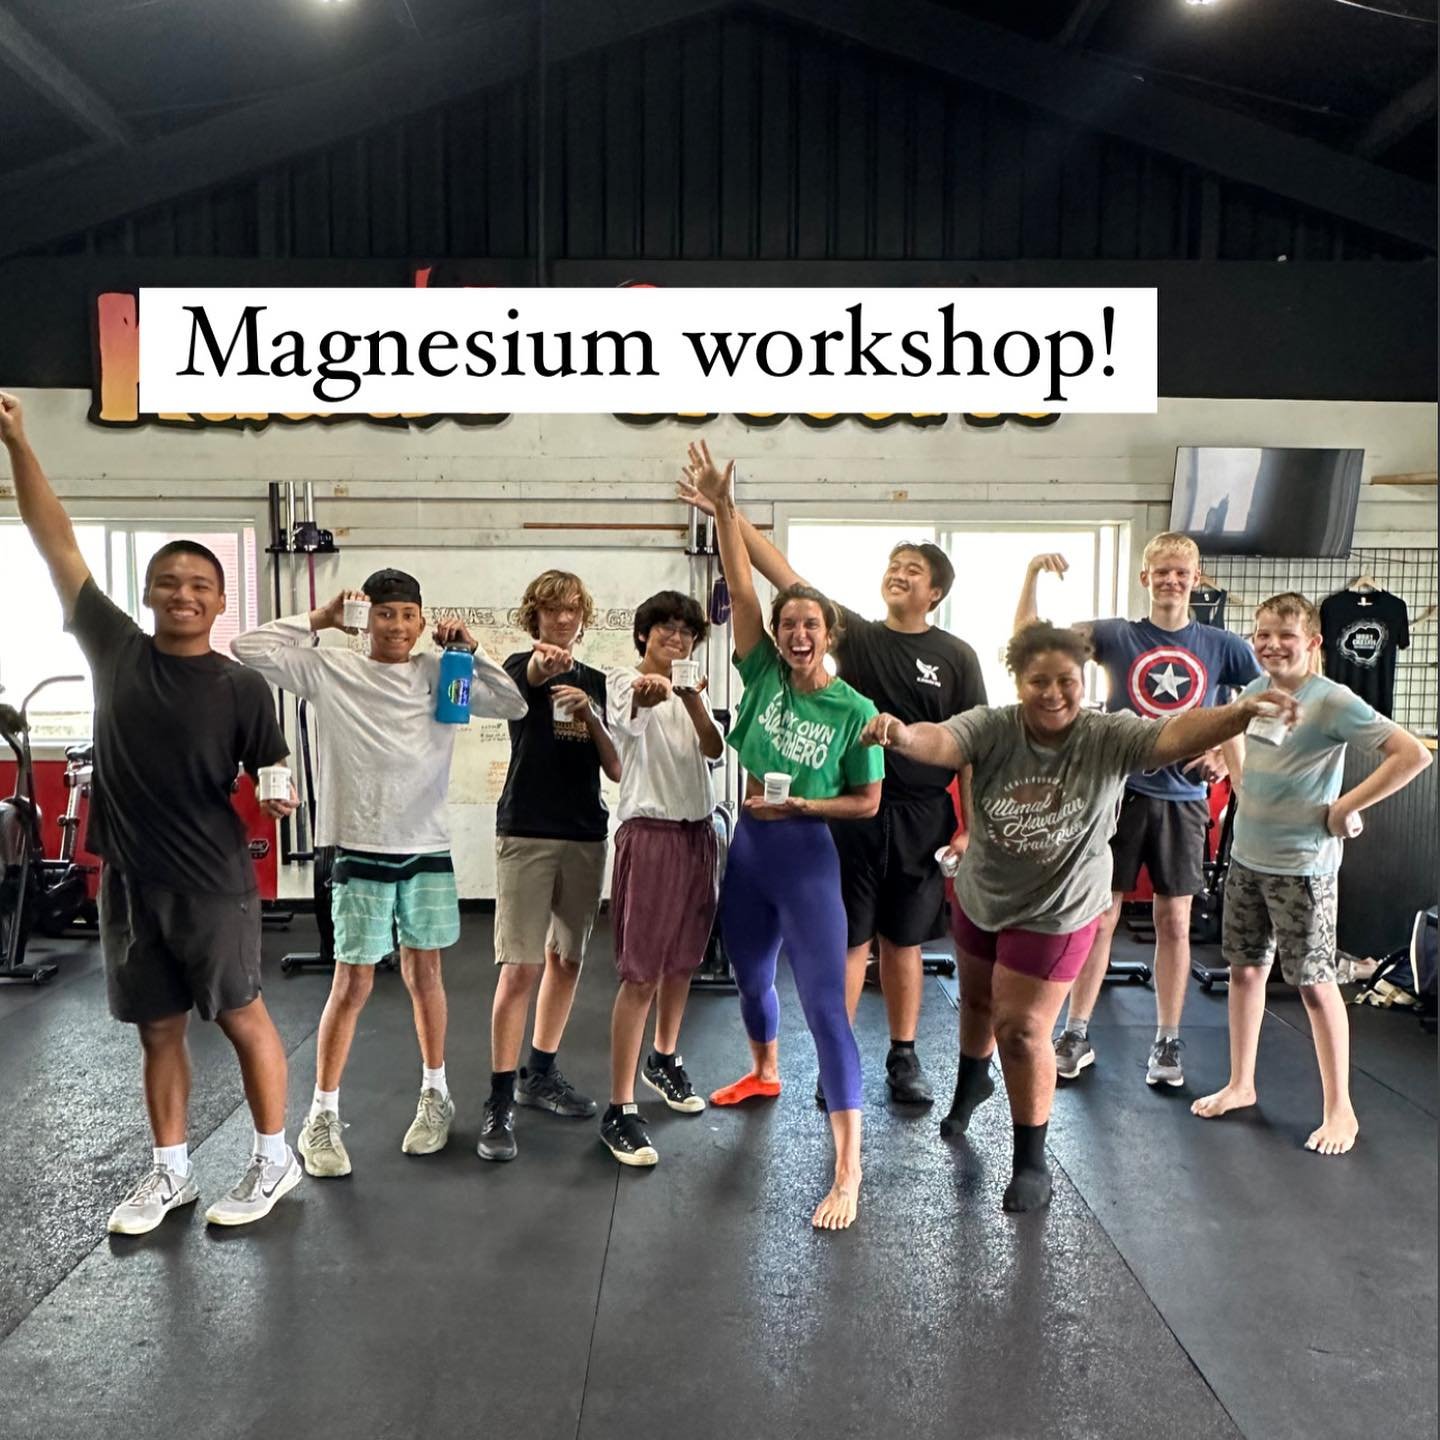 I am so grateful for the chance to teach these teens about LATS and MAGNESIUM! Donated a bunch of @myempirica magnesium through your purchases to @kealafoundation - it was magic and wonderful!!

@ultimatehawaiiantrailrun